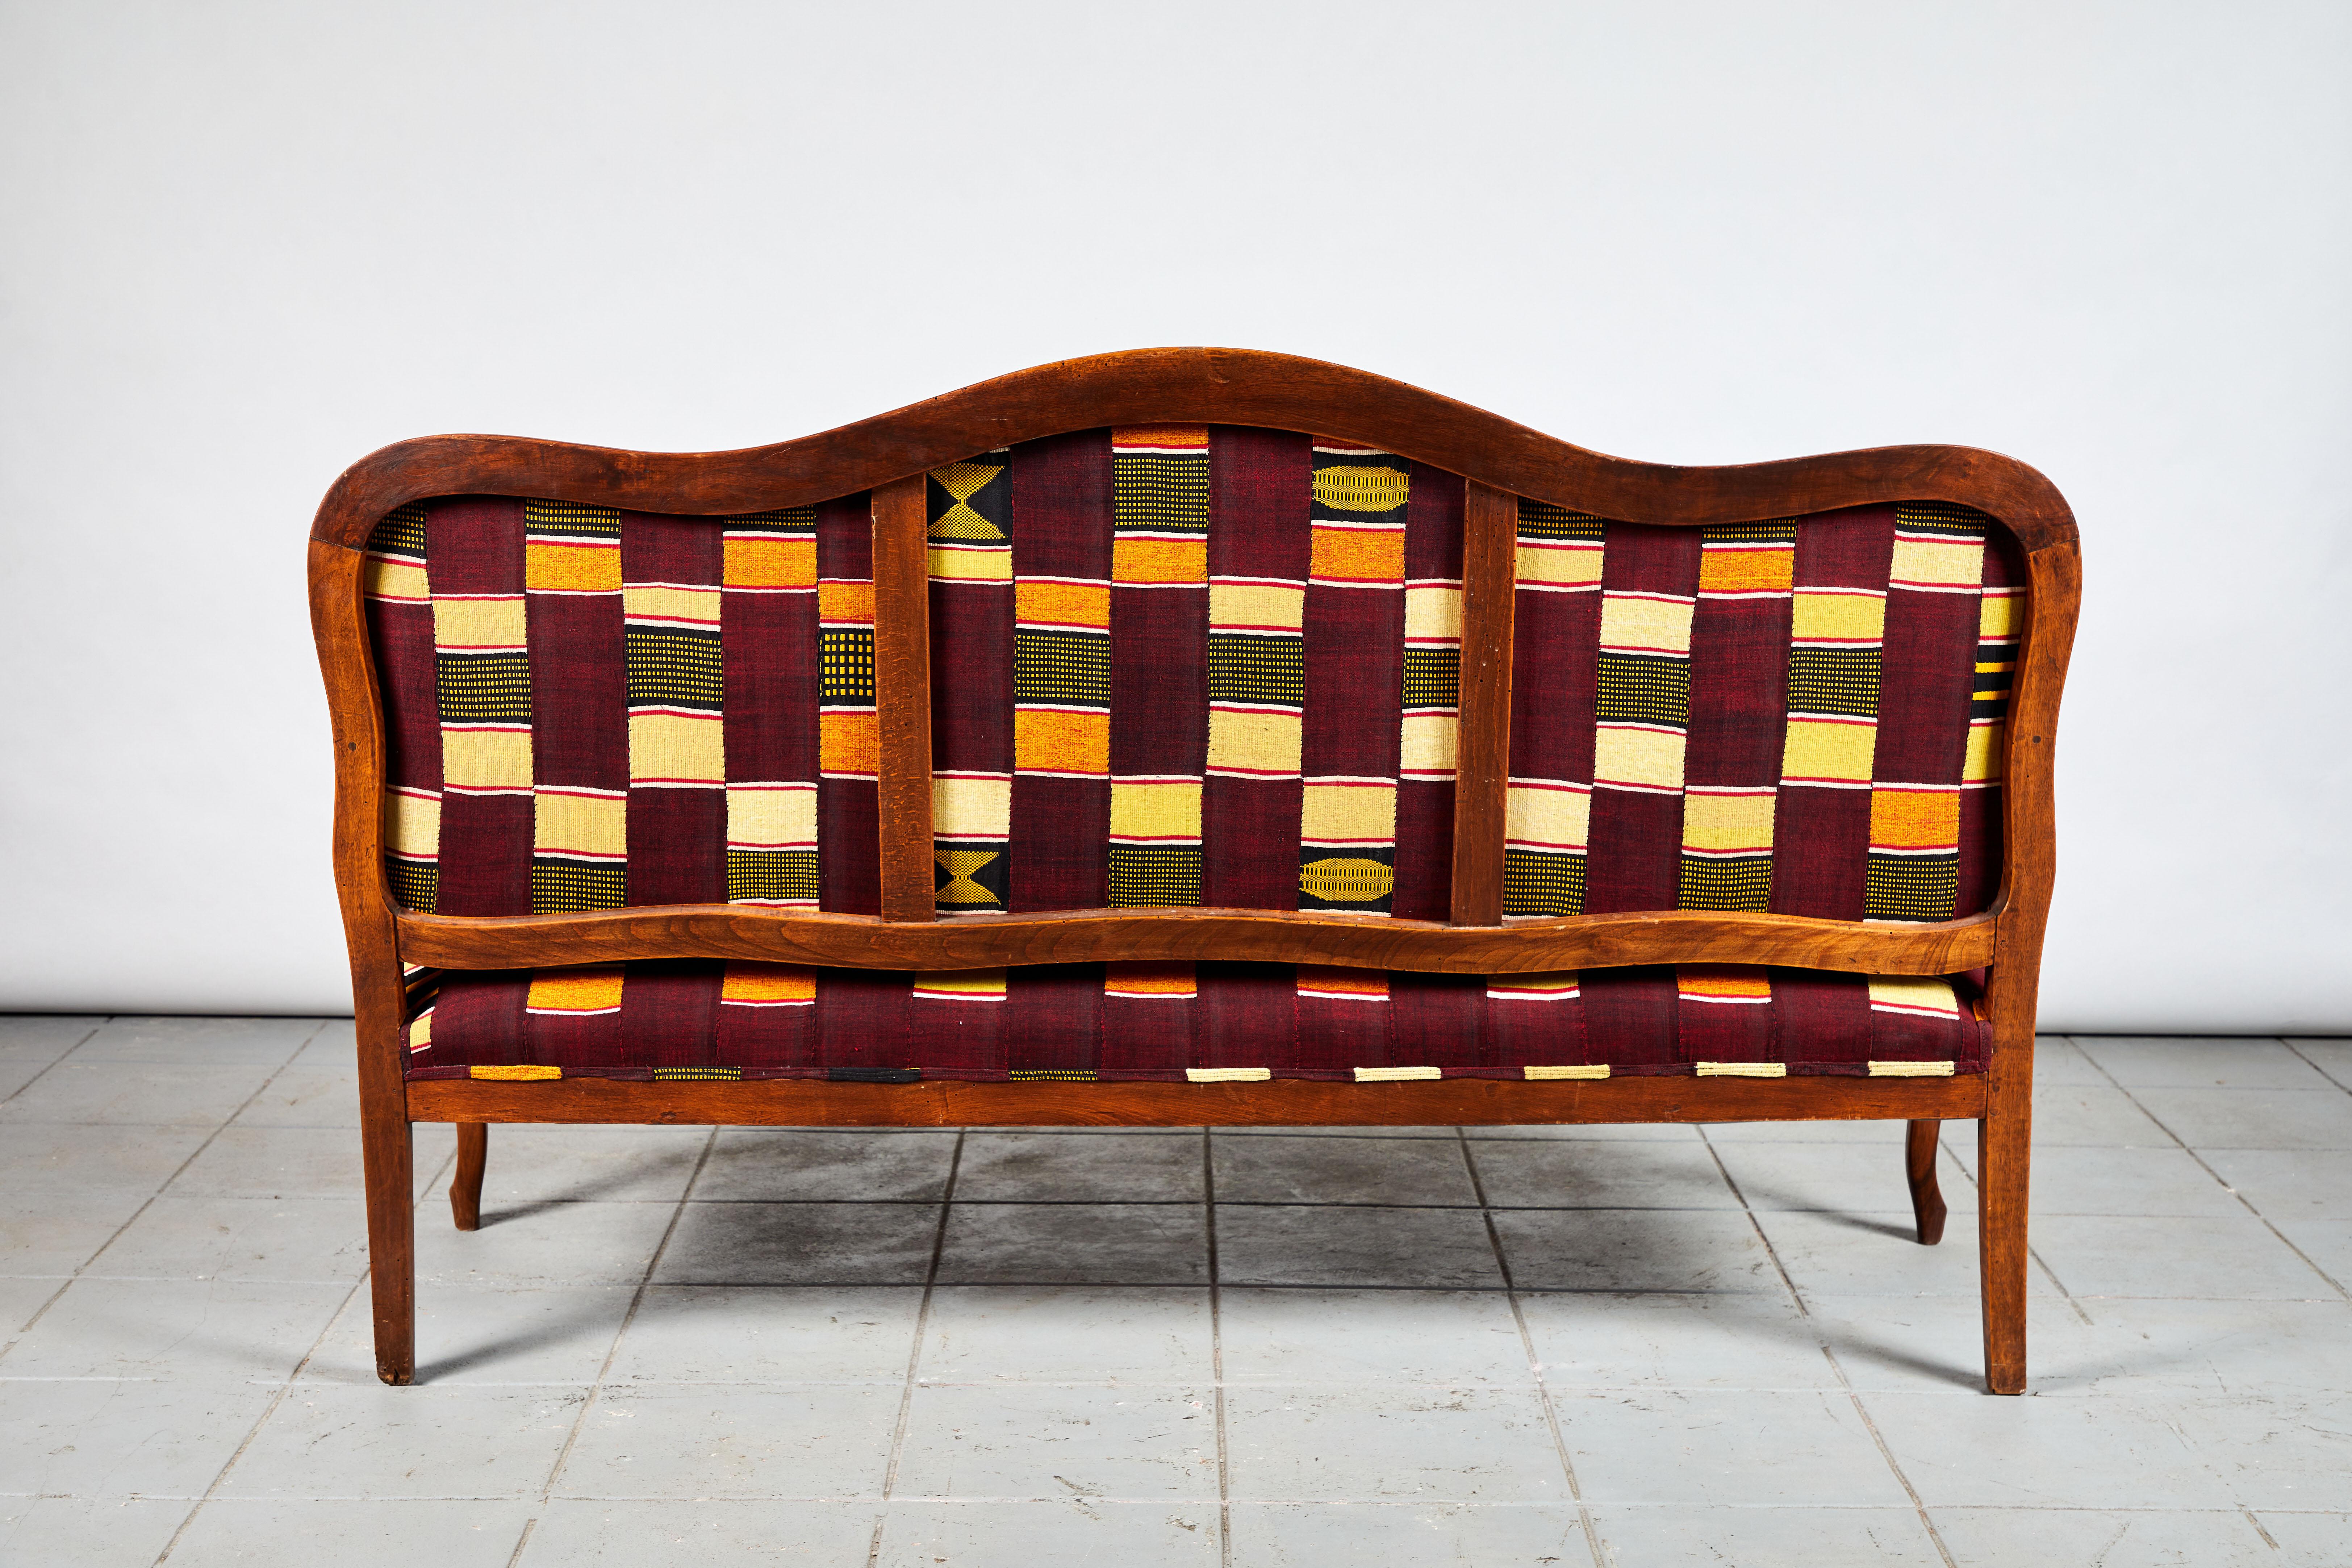 French Wooden Framed Camelback Bench in Ewe Fabric from Ghana 1